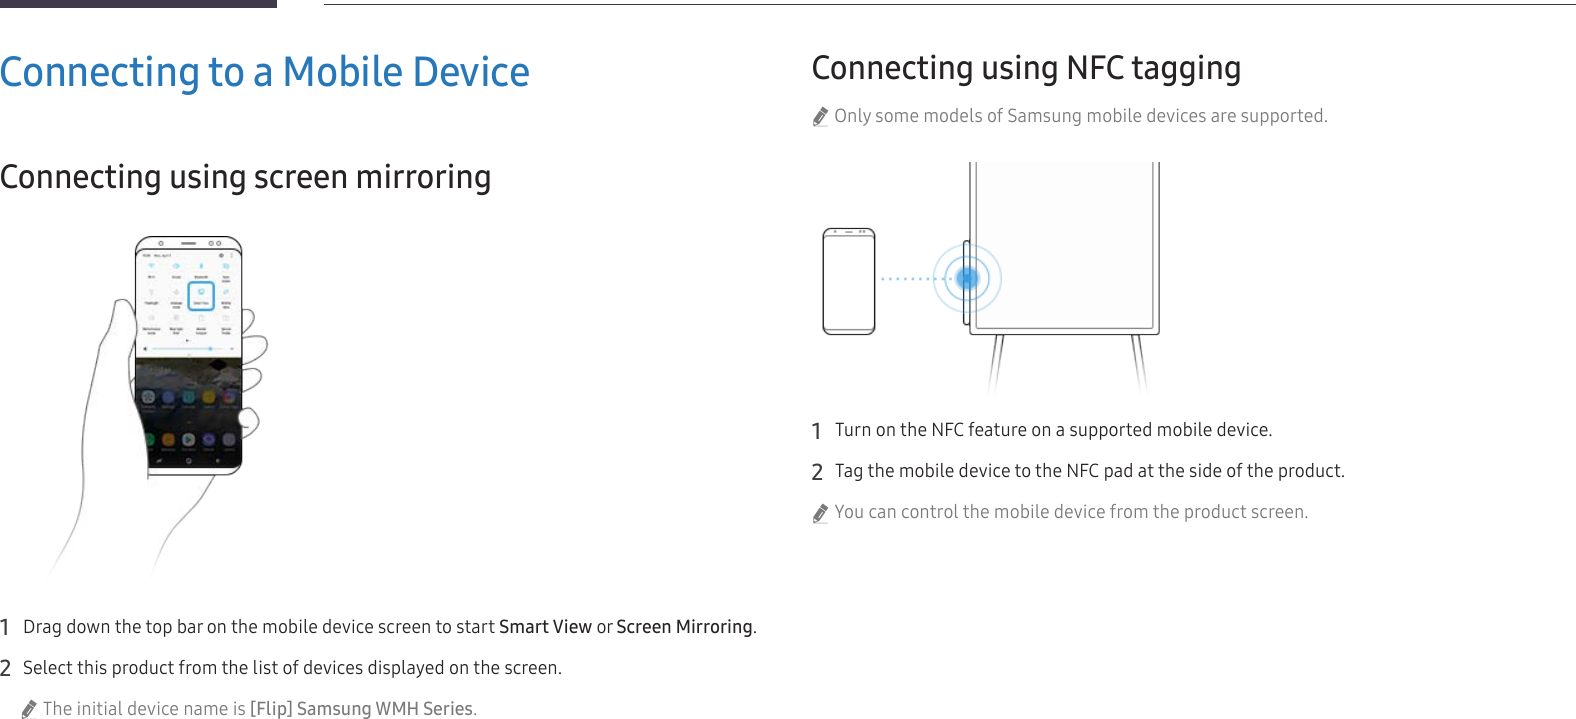 26Connecting to a Mobile DeviceConnecting using screen mirroring1 Drag down the top bar on the mobile device screen to start Smart View or Screen Mirroring.2 Select this product from the list of devices displayed on the screen. &quot;The initial device name is [Flip] Samsung WMH Series.Connecting using NFC tagging &quot;Only some models of Samsung mobile devices are supported.1 Turn on the NFC feature on a supported mobile device.2 Tag the mobile device to the NFC pad at the side of the product. &quot;You can control the mobile device from the product screen.